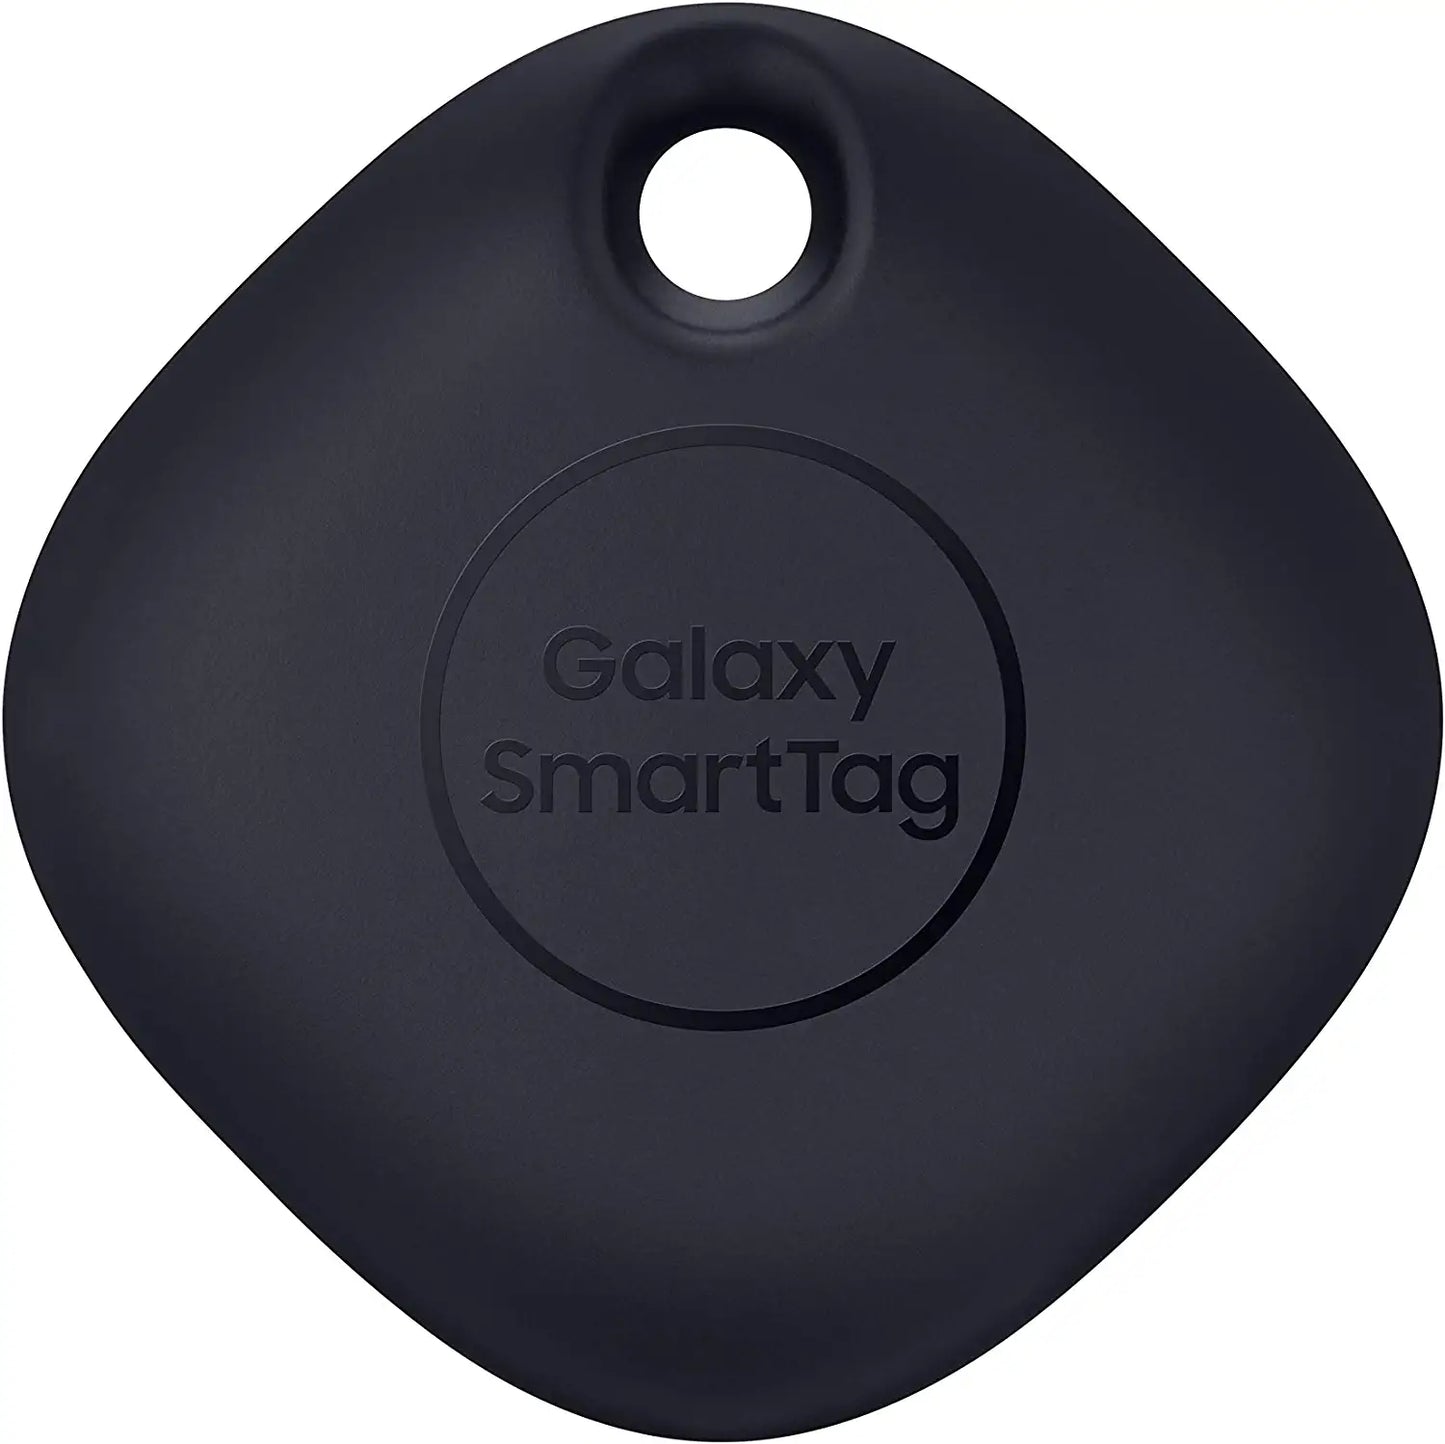 SAMSUNG Galaxy Smarttag Bluetooth Smart Home Accessory Tracker, Attachment Locator for Lost Keys, Bag, Wallet, Luggage, Pets, Glasses, 2021, US Version, Black